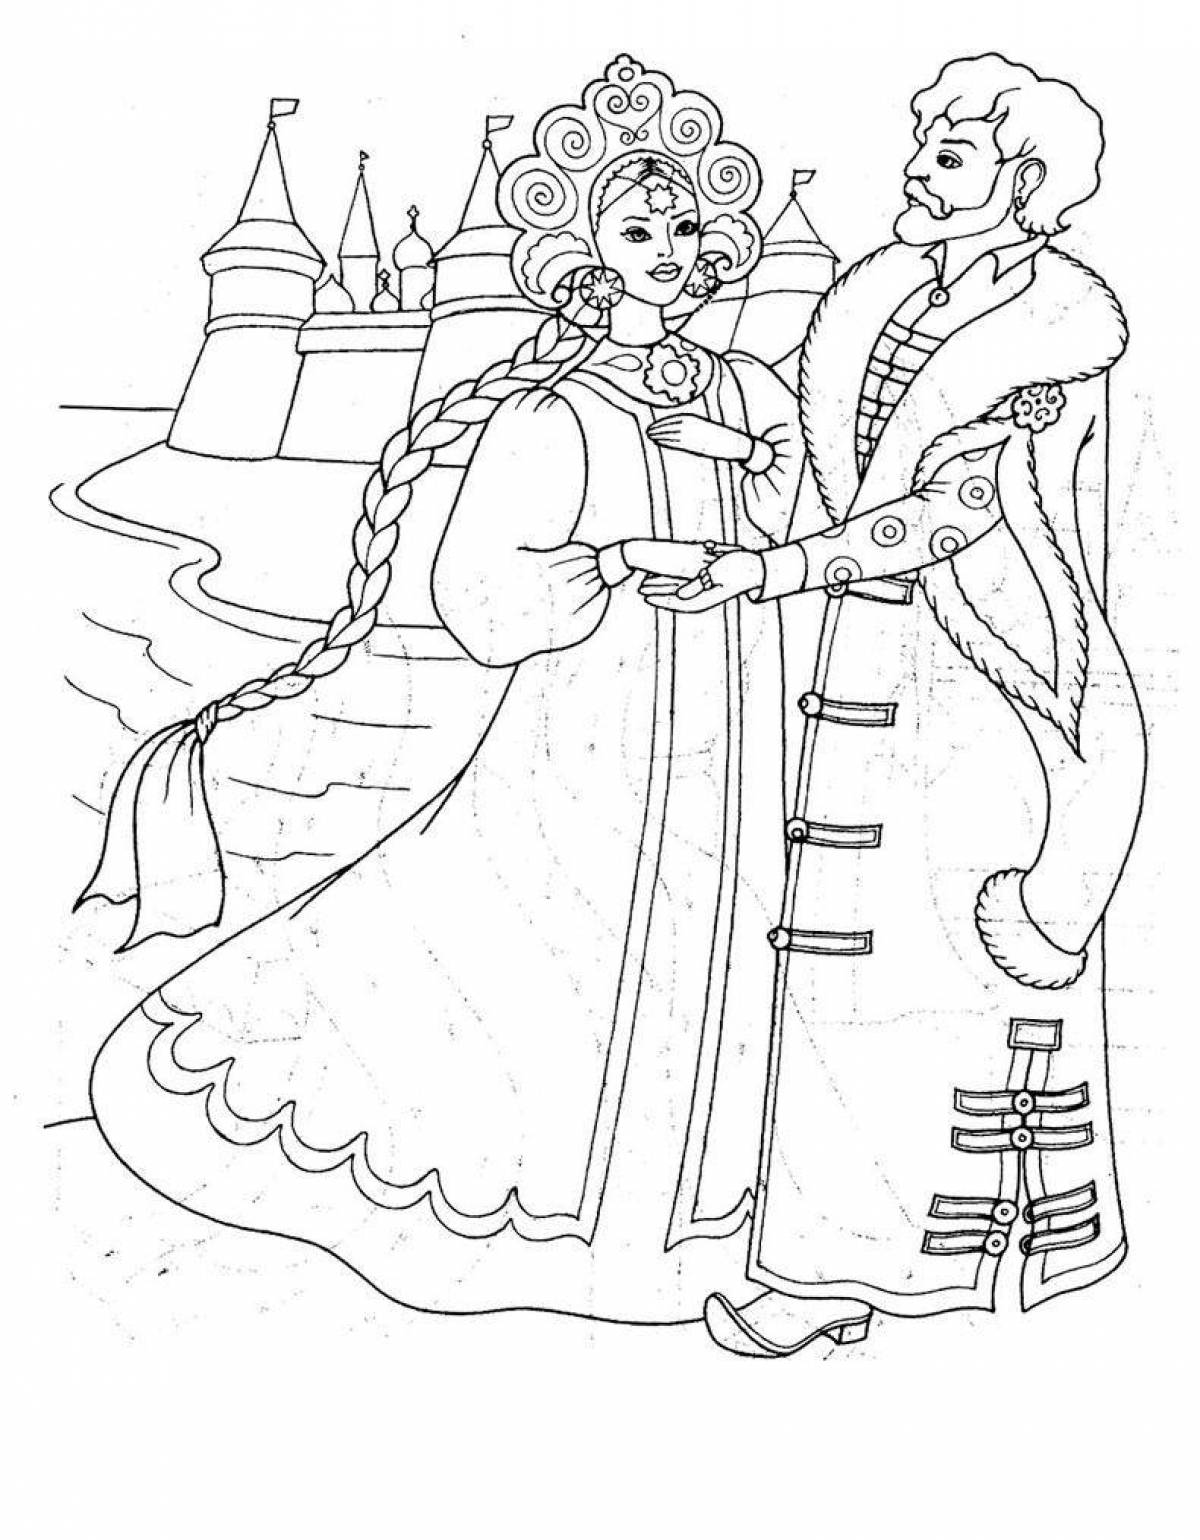 Coloring book Pushkin's magnificent fairy tale about Tsar Saltan